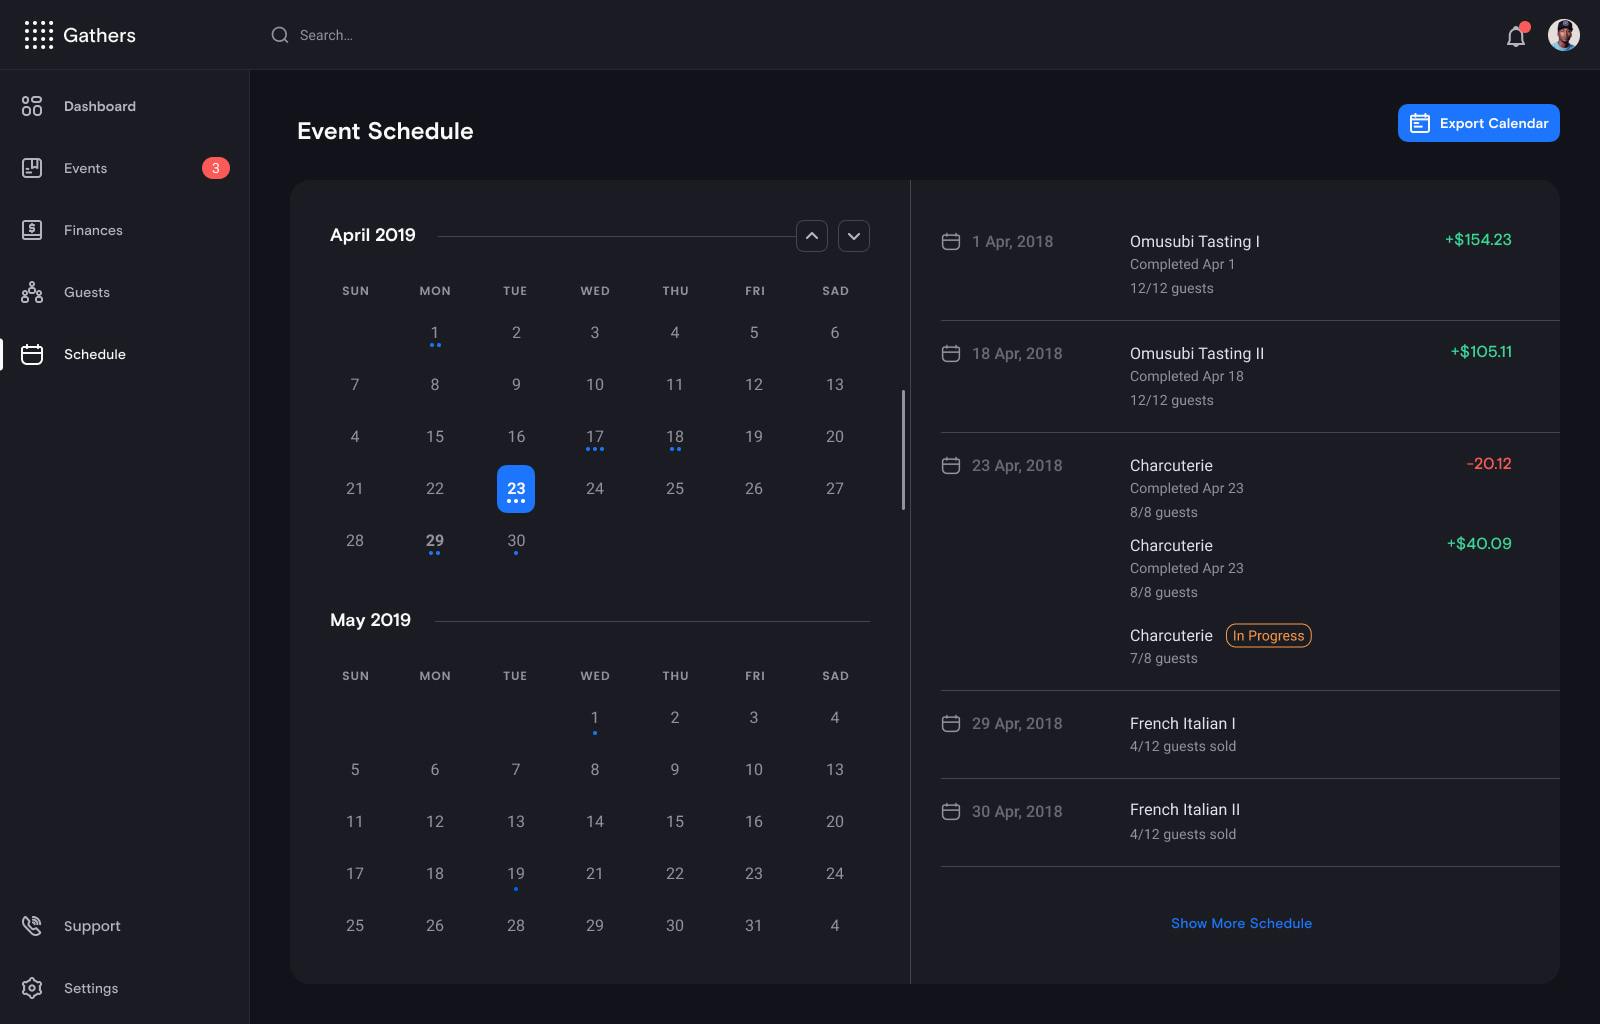 The Gathers software scheduling page